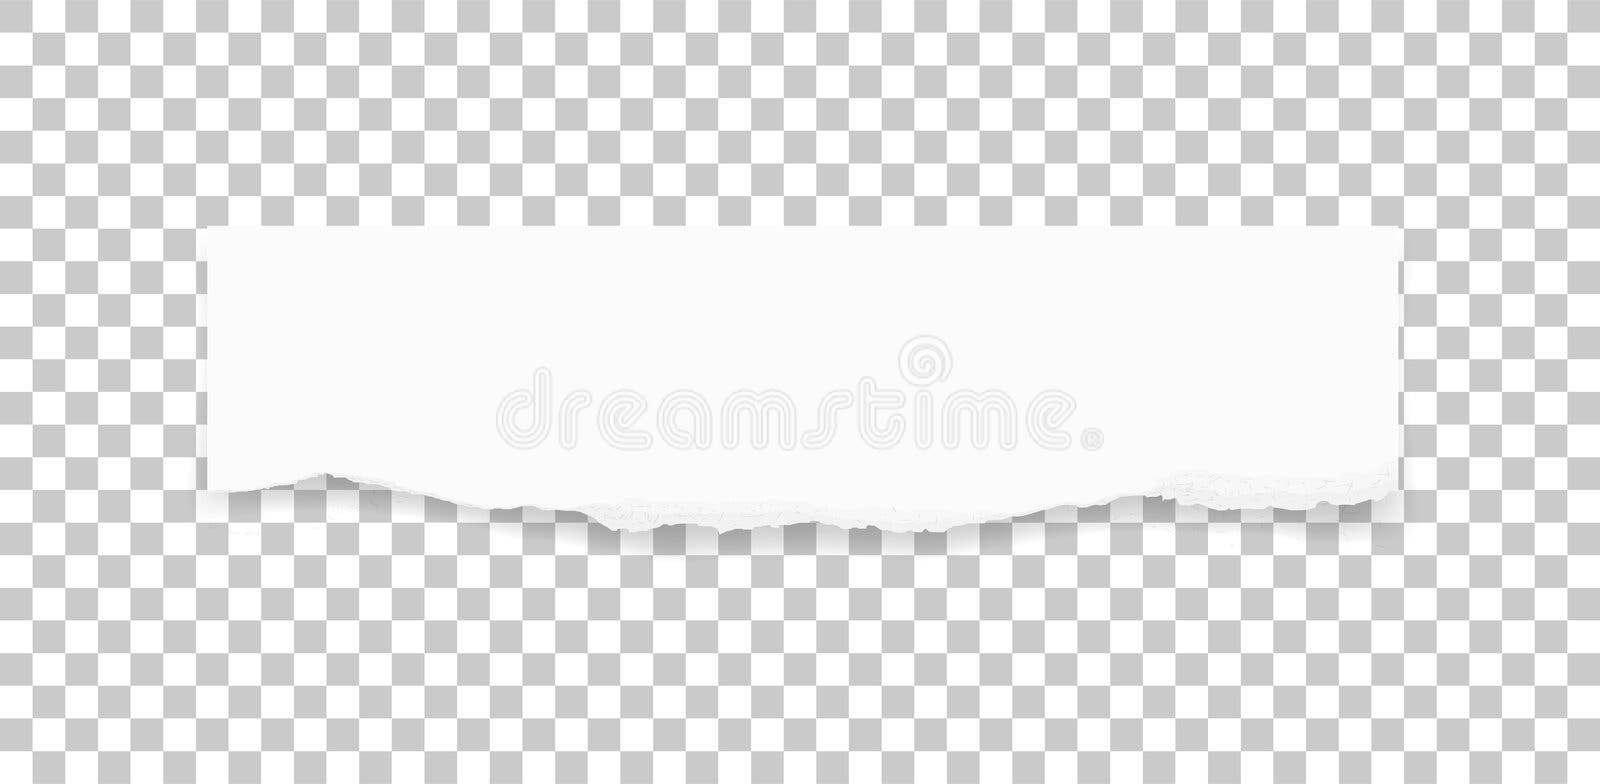 Paper Tear Texture Vector PNG Images, Paper Texture With Tear